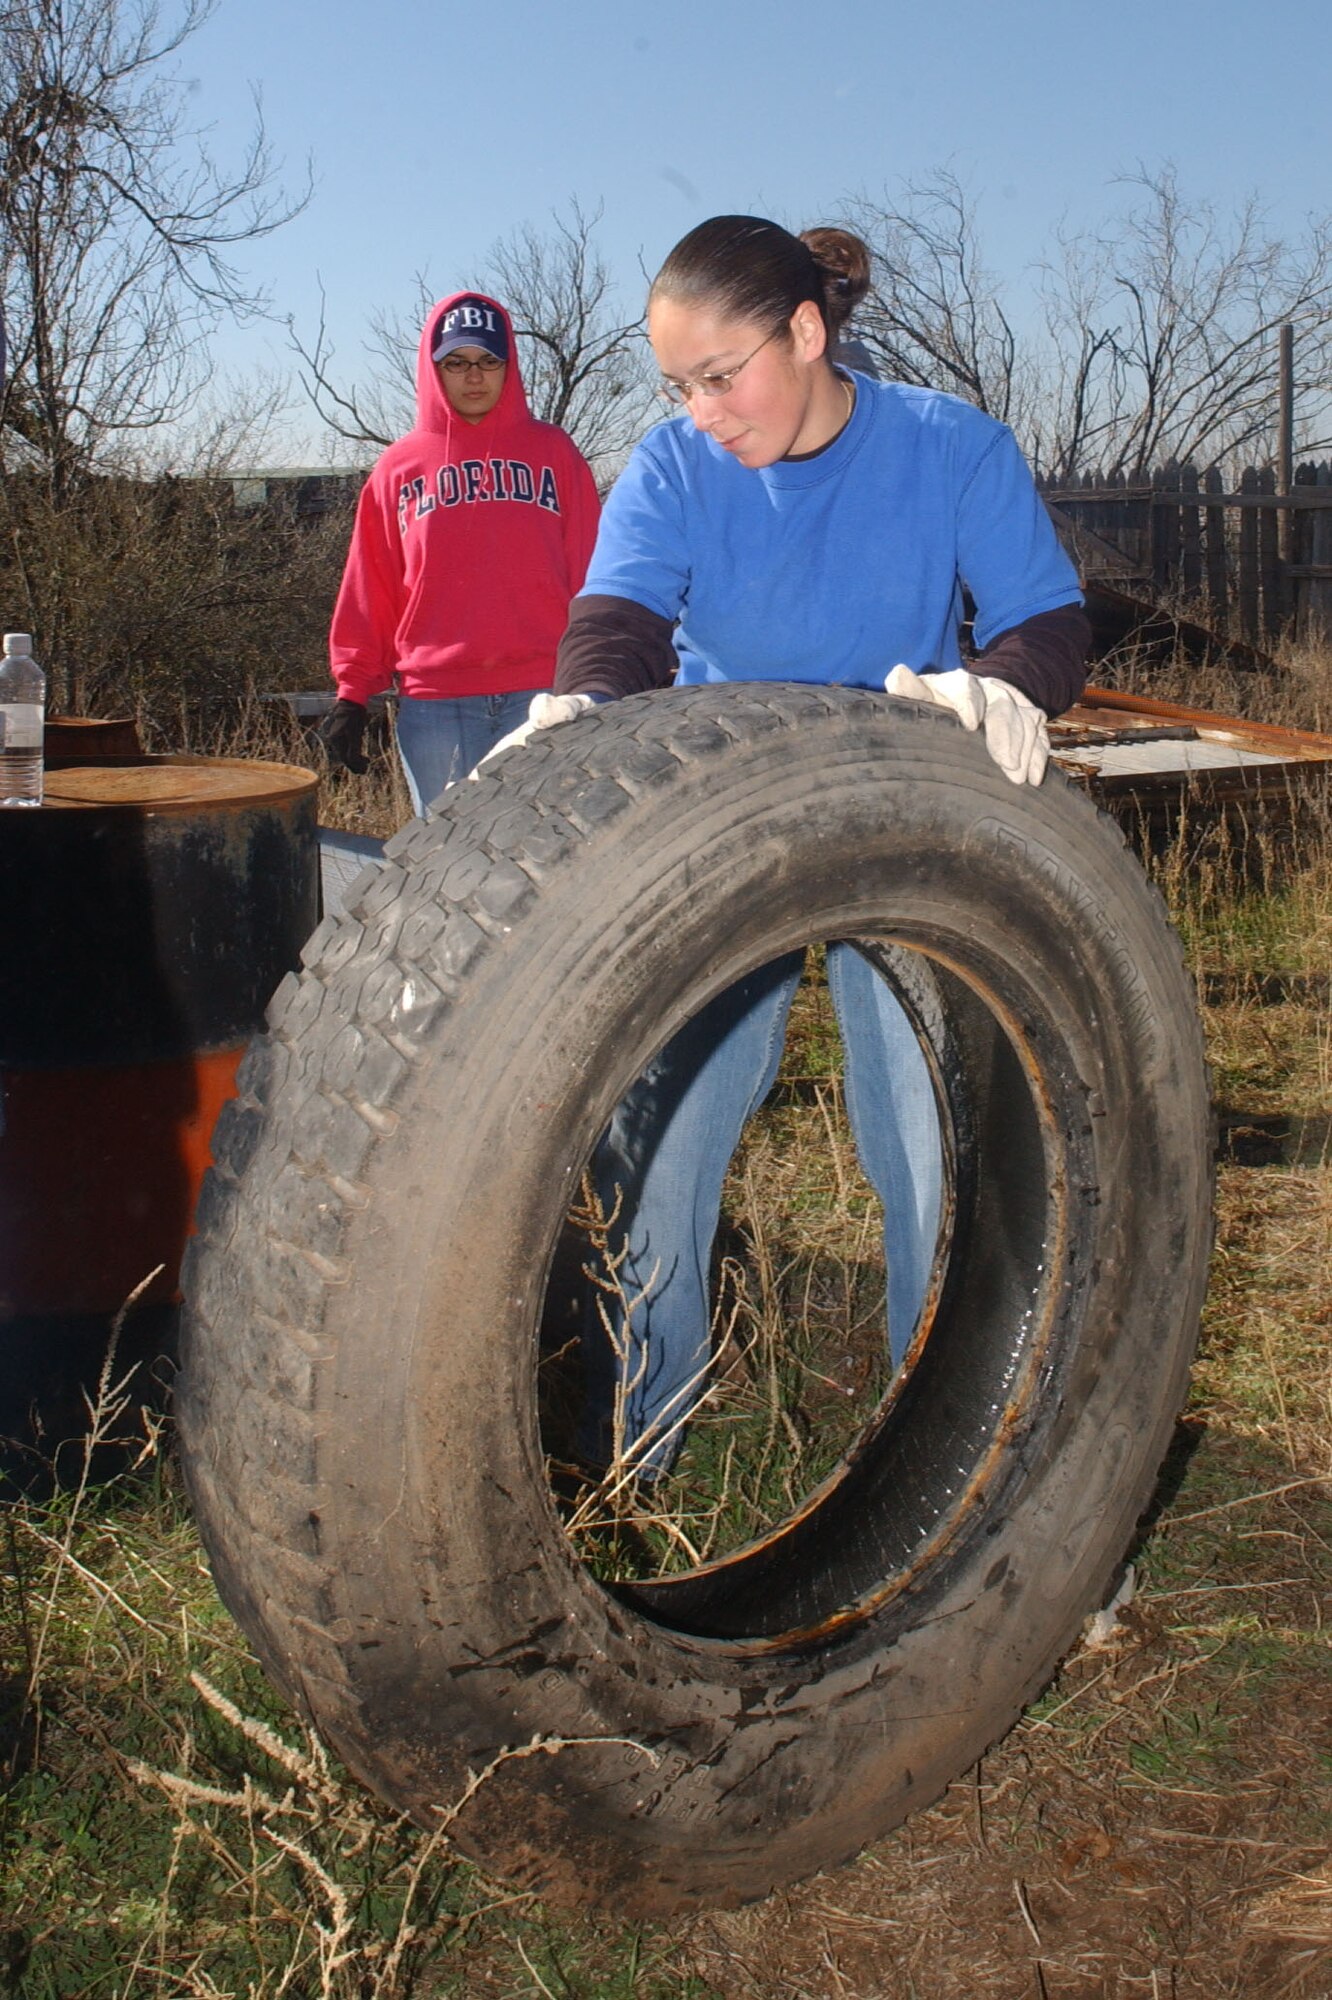 Senior Airman Diana Klesel rolls a large tire out of the way. (U.S. Air Force photo by Staff Sgt. Gina O’Bryan)